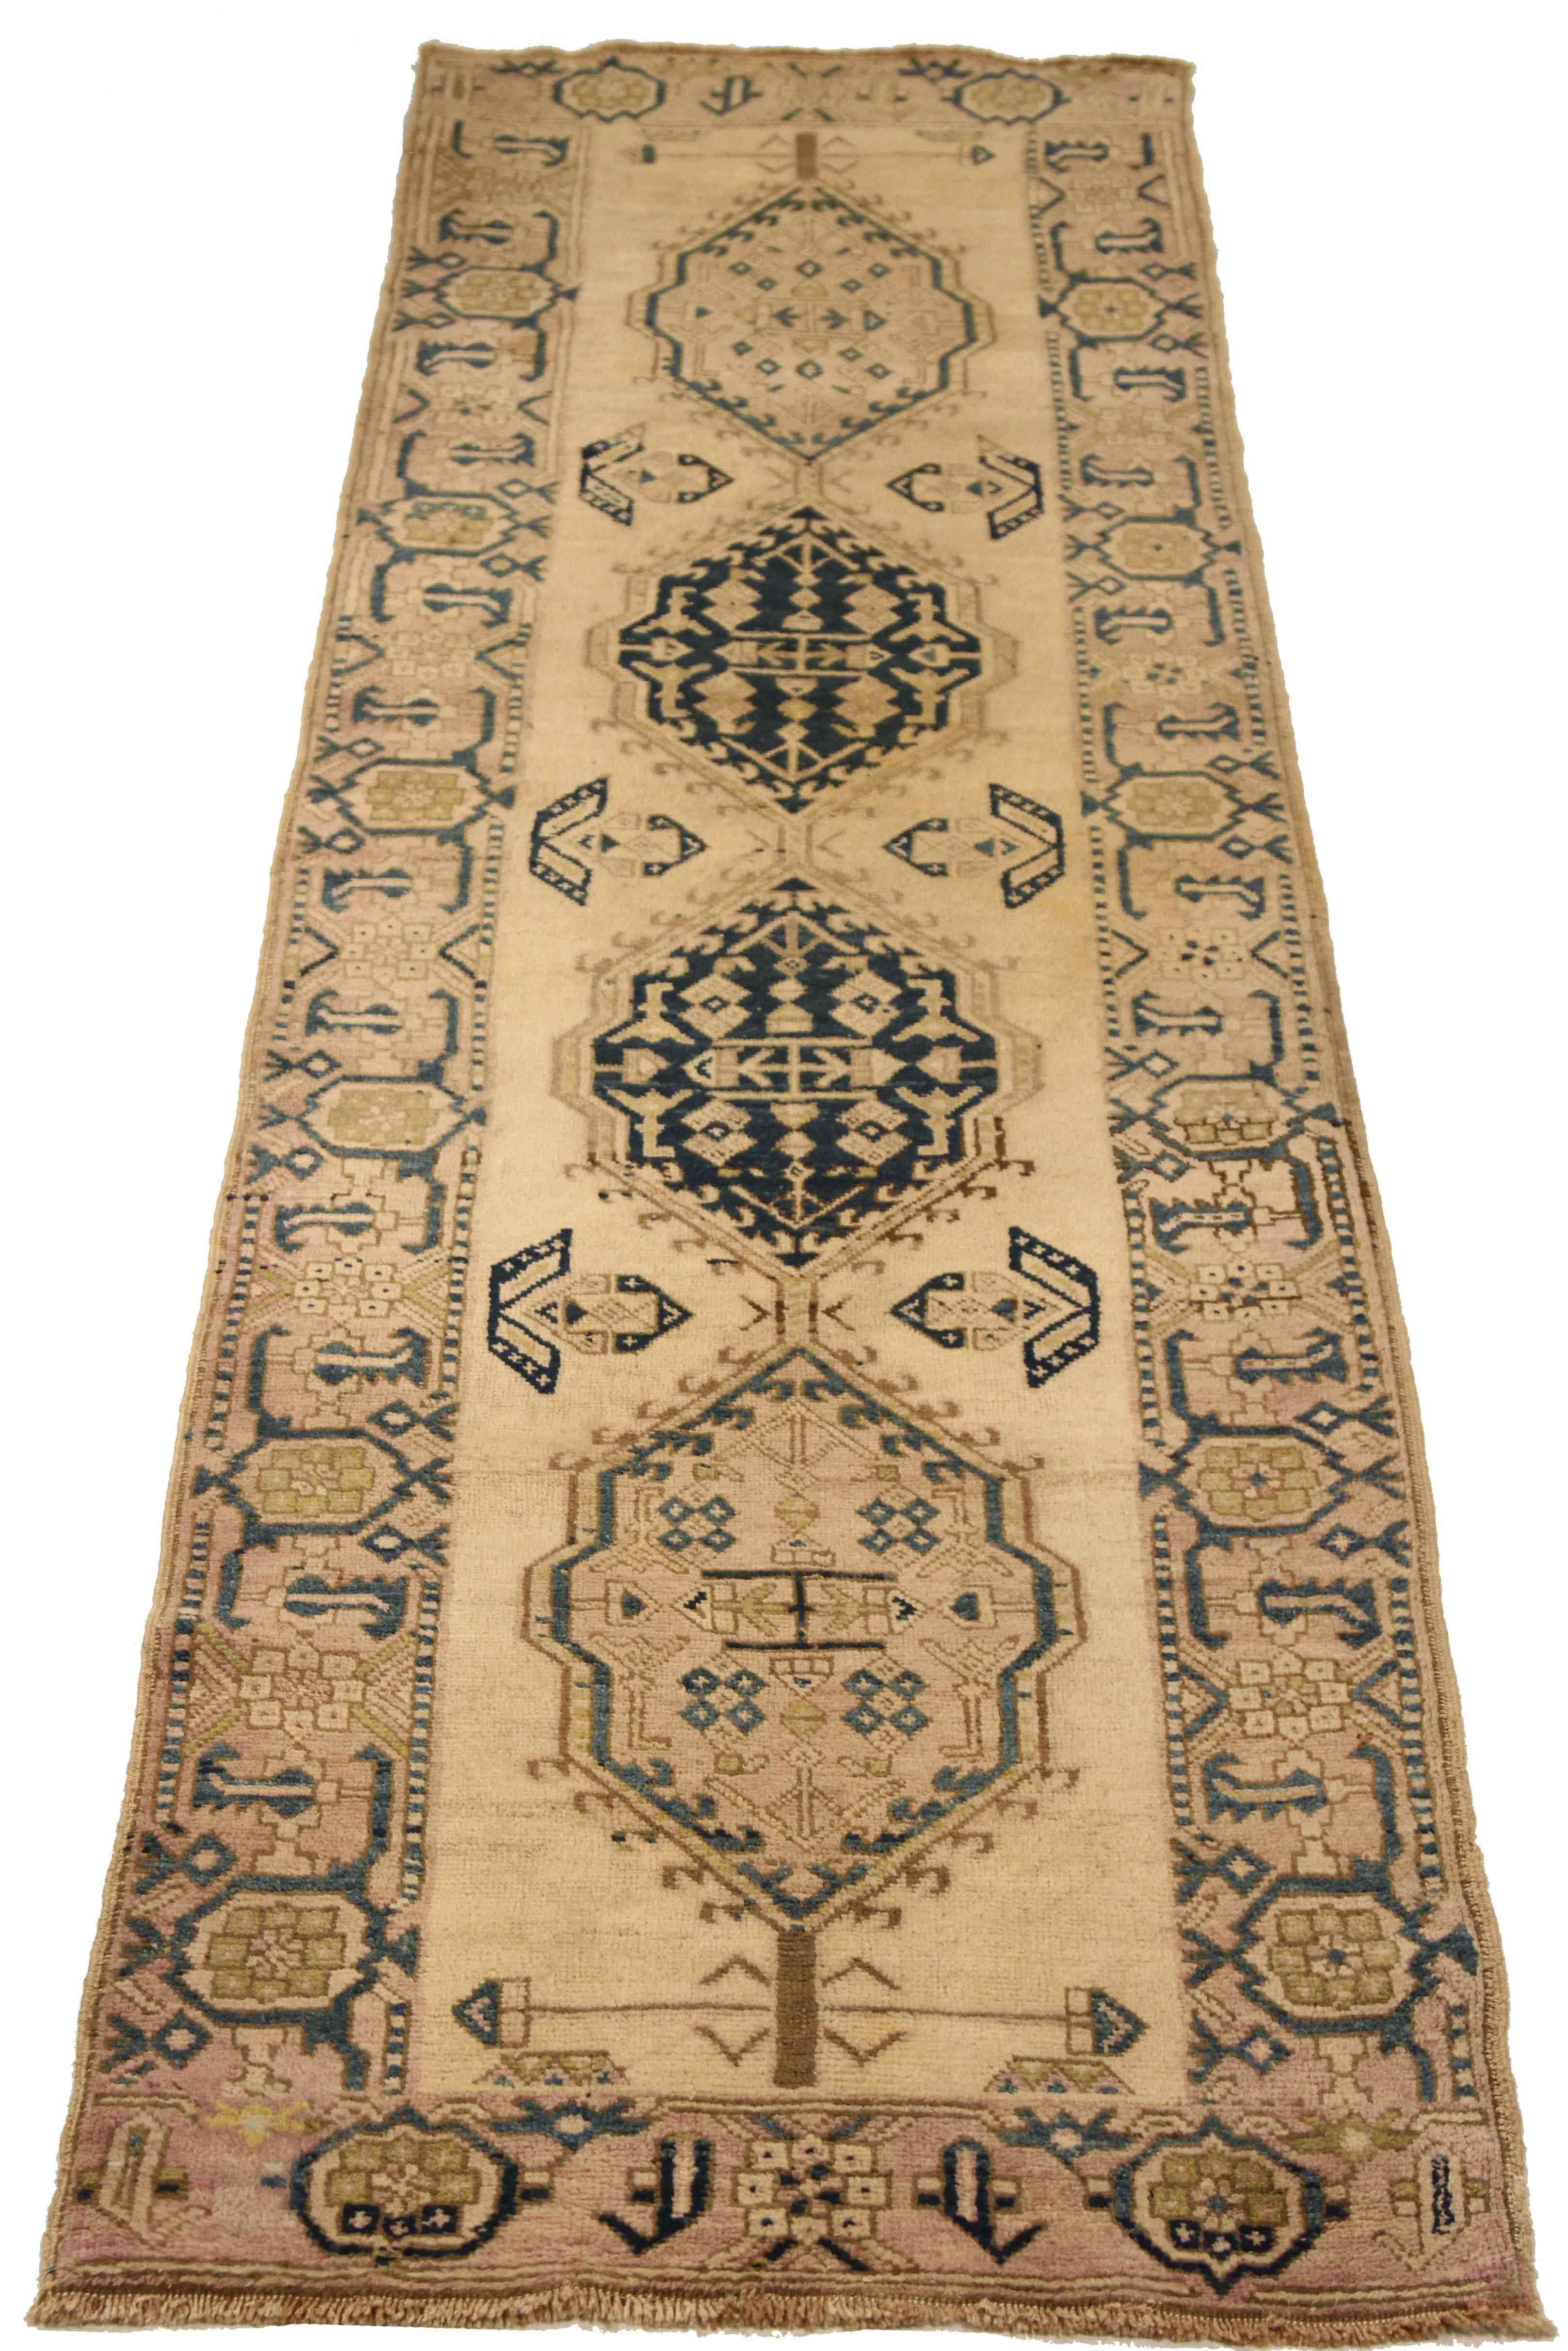 Antique Persian Rug Sarab Design with Camel Hair Tribal Patterns, circa 1910s For Sale 1